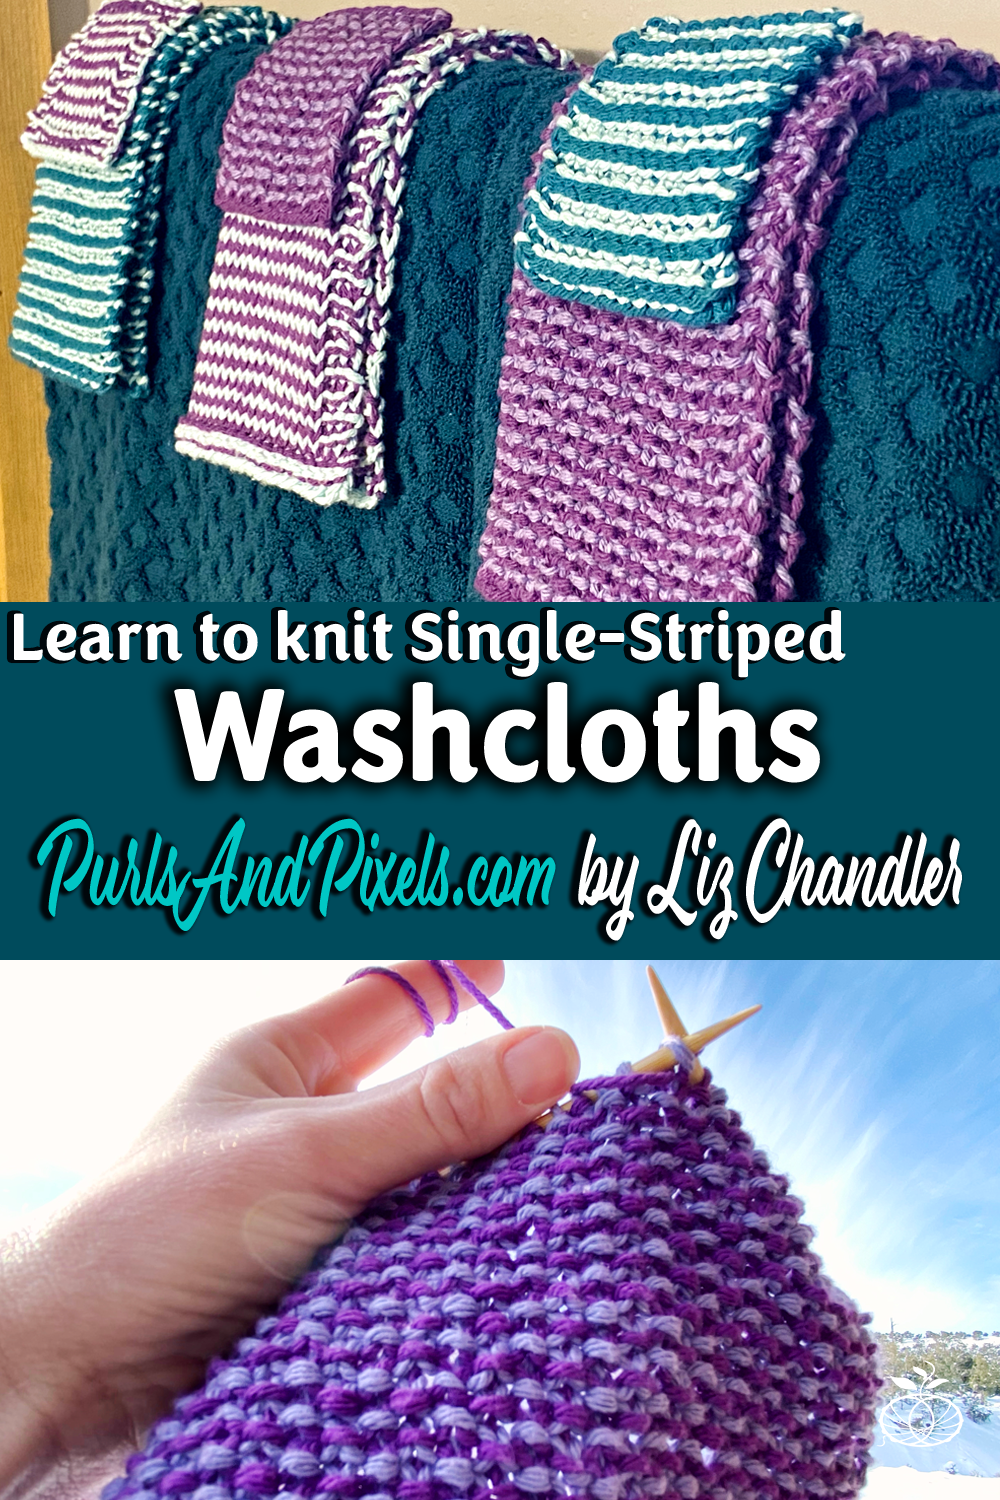 Single Striped Washcloth Knitting Pattern Collection by Liz Chandler @PurlsAndPixels.